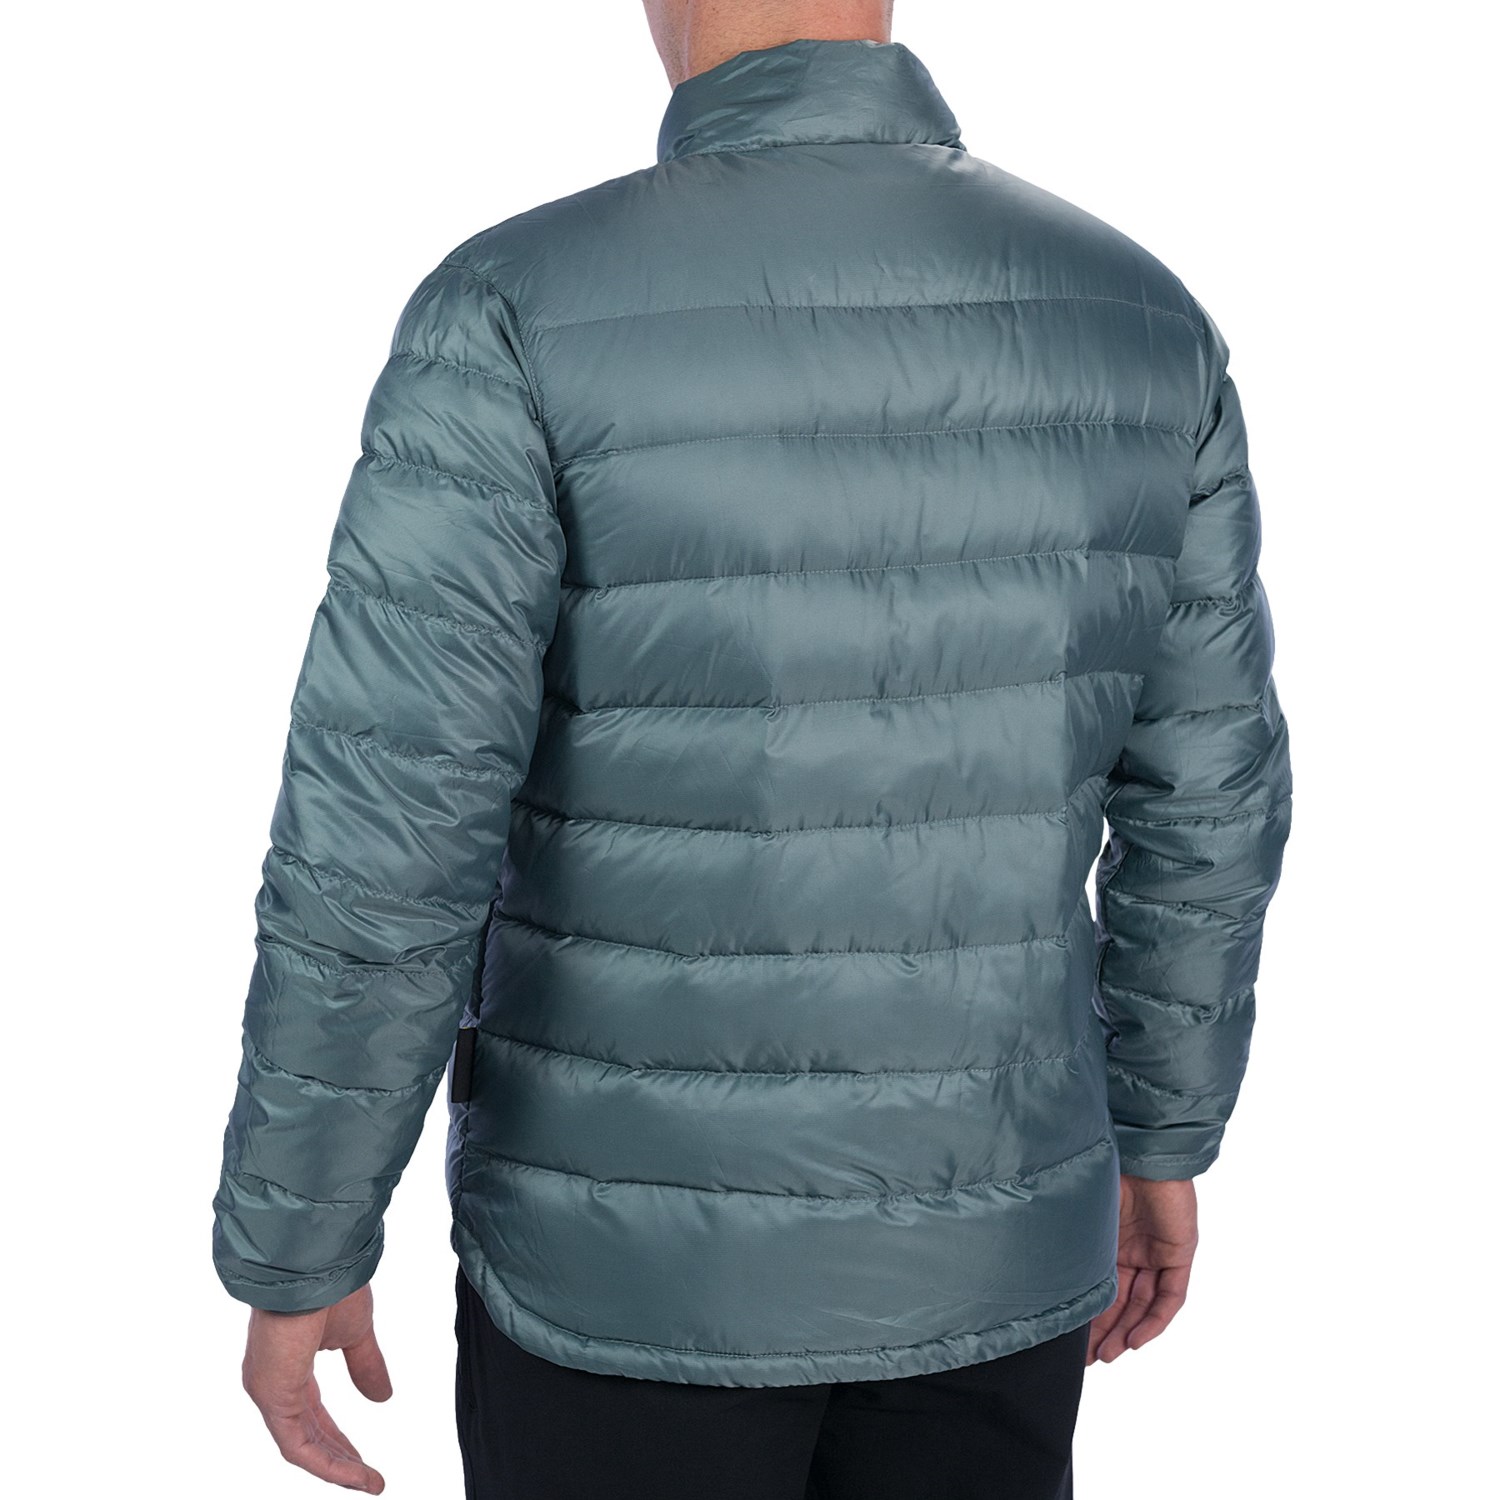 Flylow Rudolph Down Jacket (For Men) 6355R - Save 33%